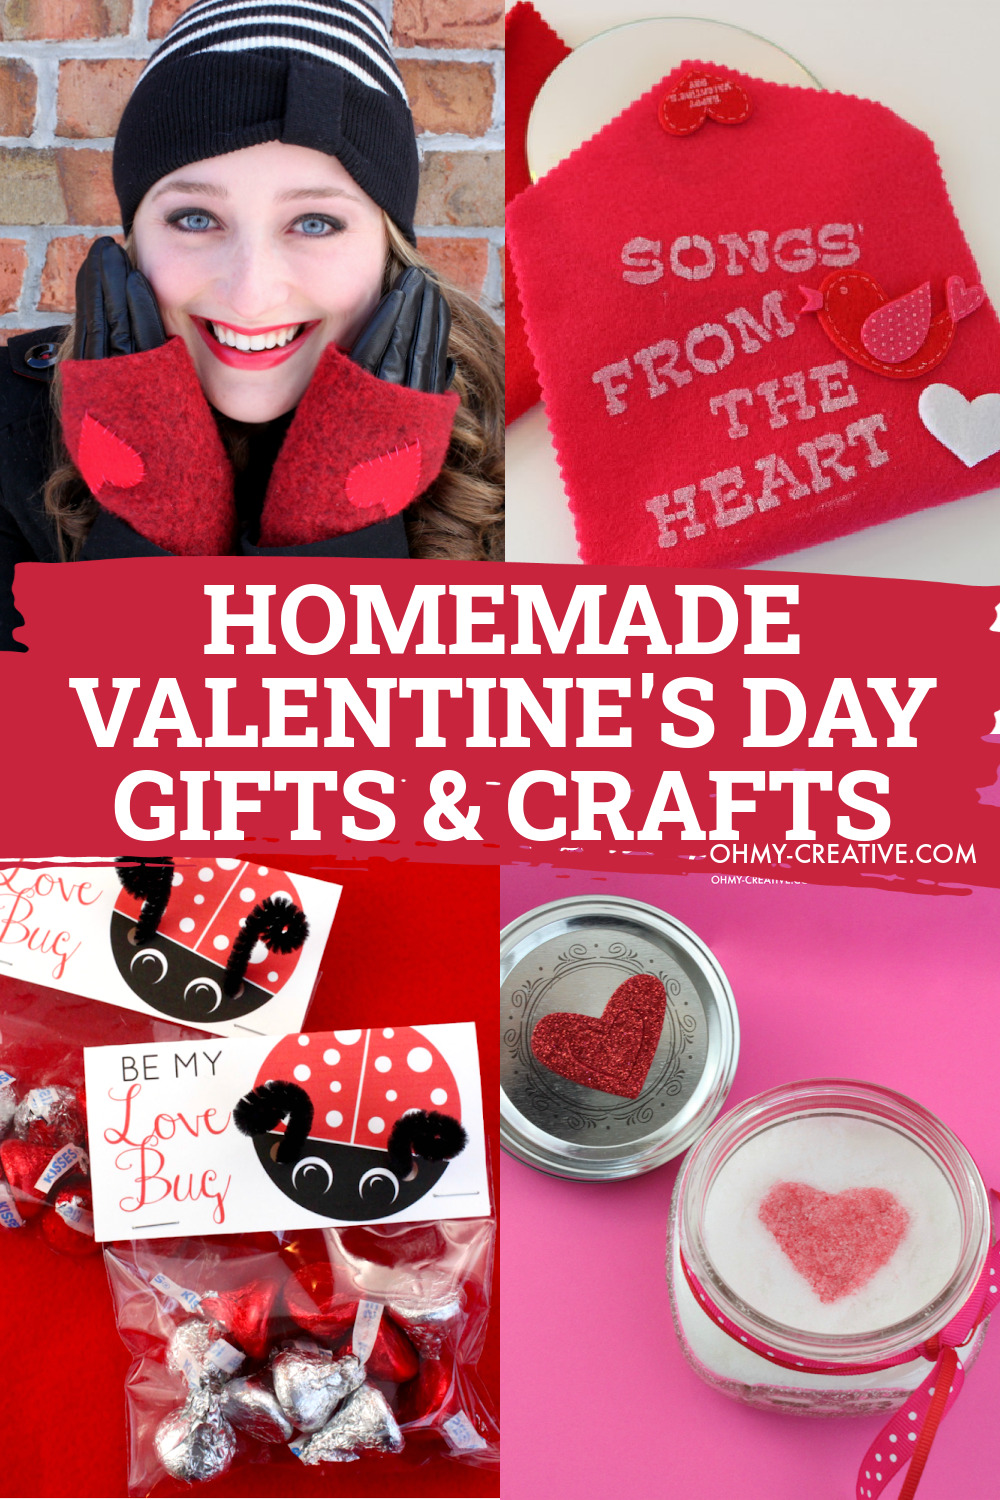 Creative Valentine's Day Crafts including heart fingerless gloves, heart sugar scrub and Valentine's Day Treat bags for kids.